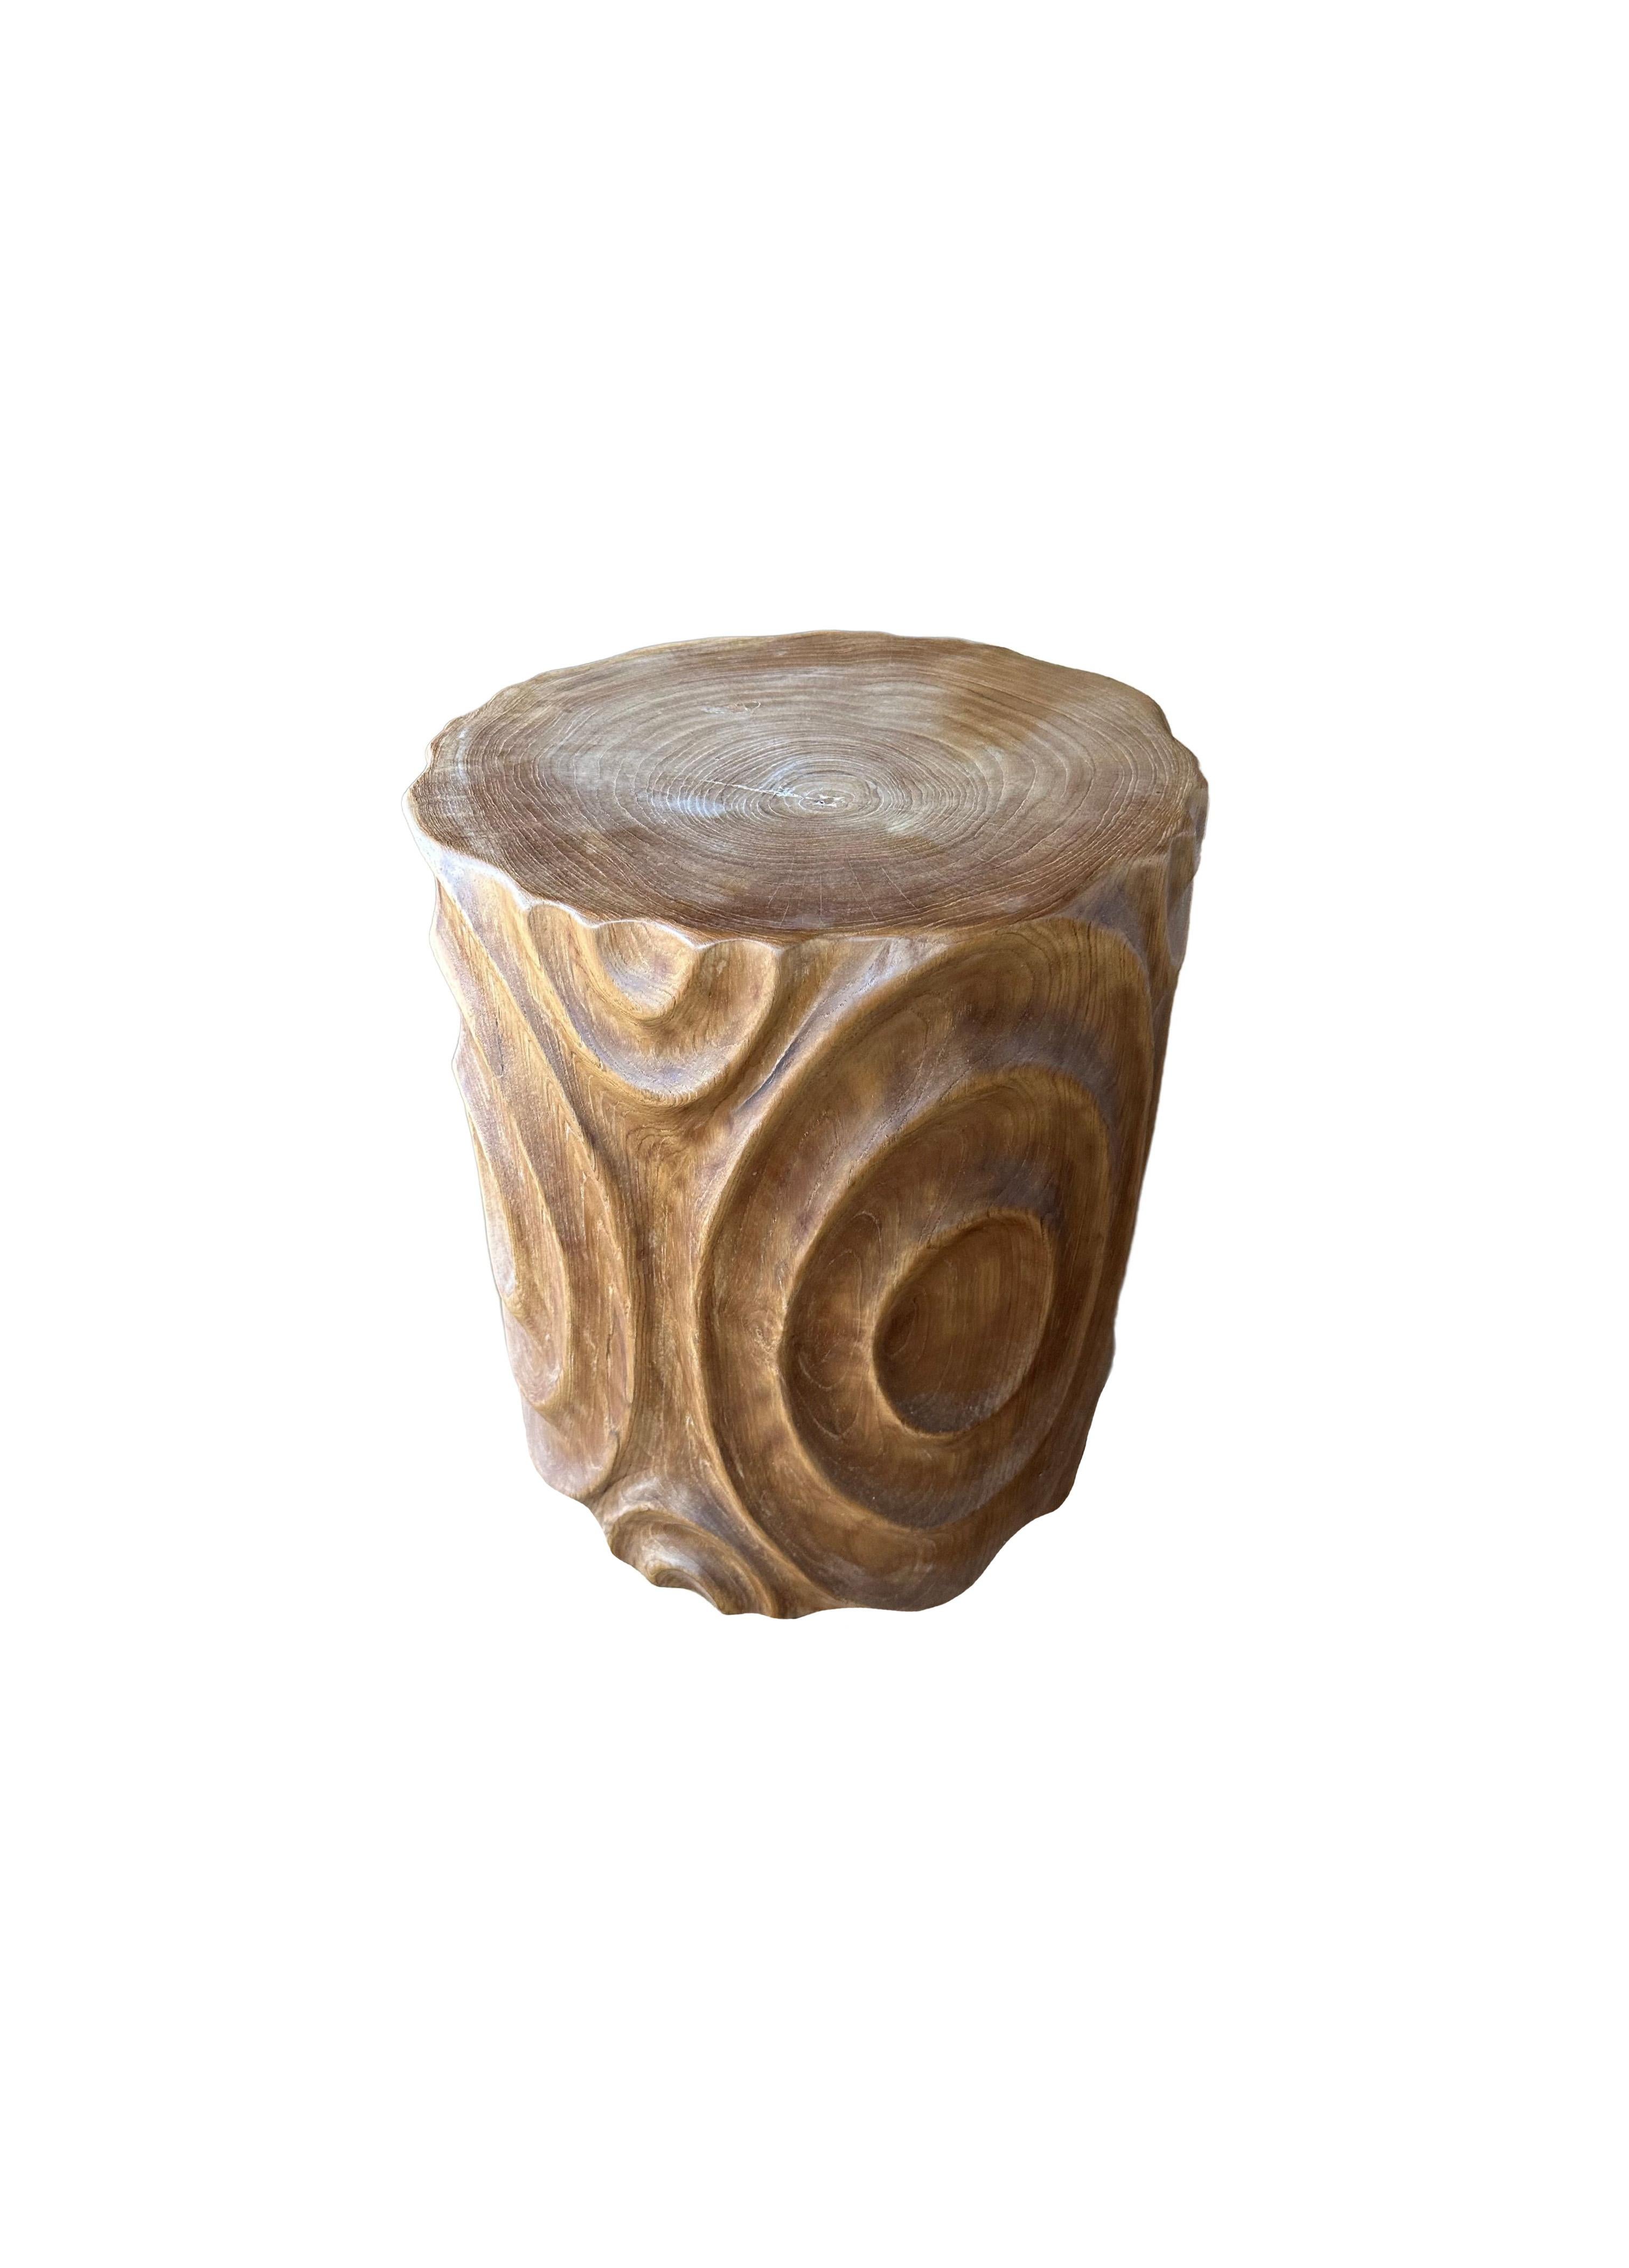 A wonderfully sculptural round side table. Its neutral pigments make it perfect for any space. It was crafted from a solid block of teak wood and features carved detailing on its sides. The wood textures and shades present on all sides adds to its